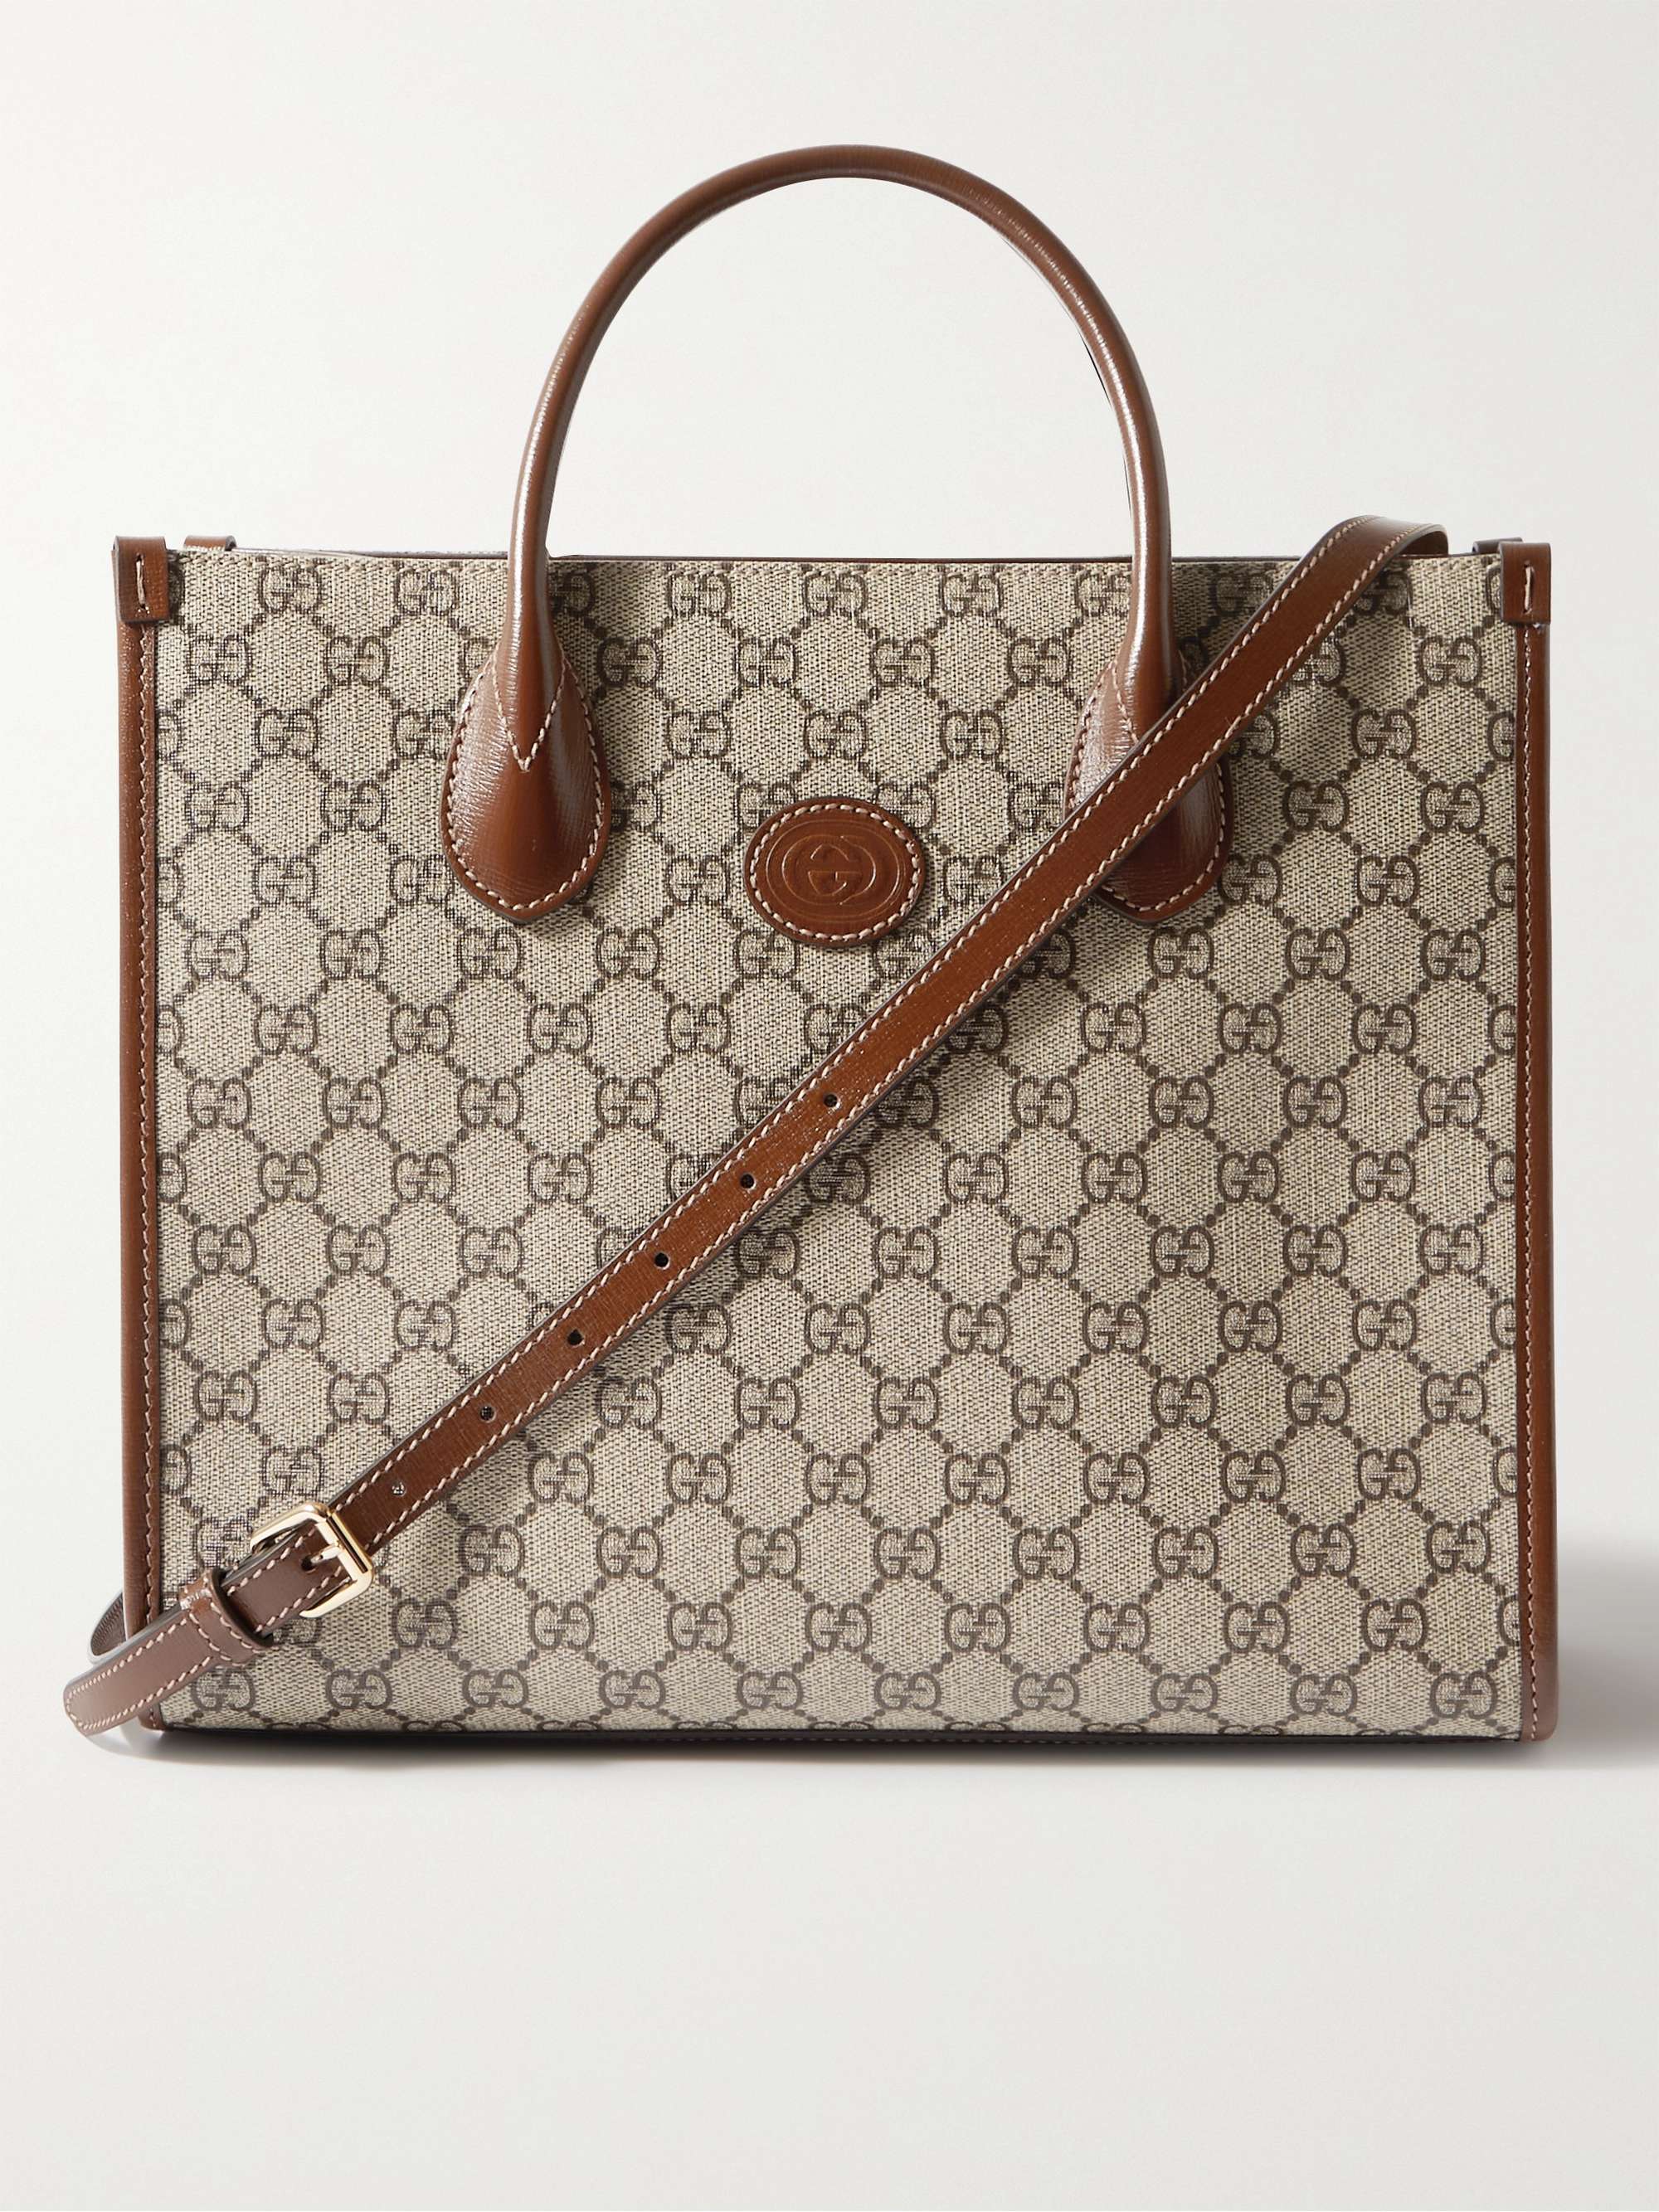 GUCCI Leather-Trimmed Monogrammed Coated-Canvas Tote Bag